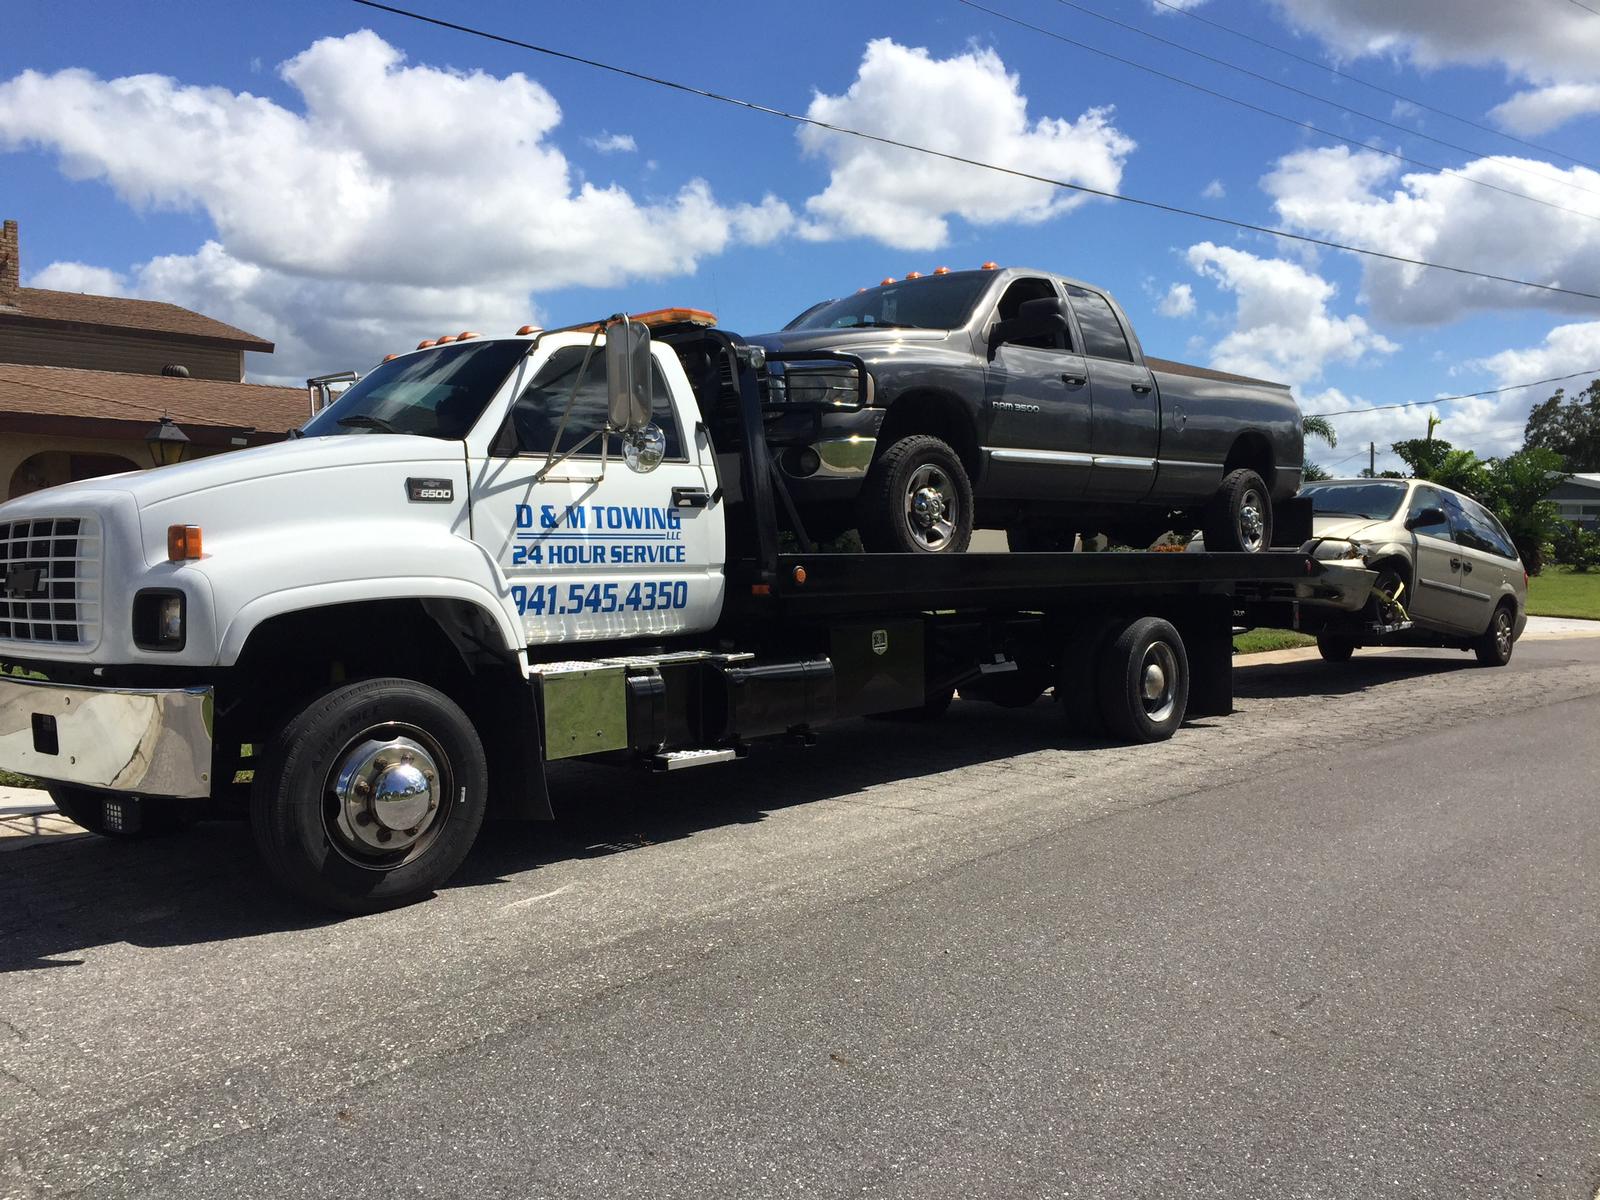 D&M Towing – The Best Towing in Bradenton, FL